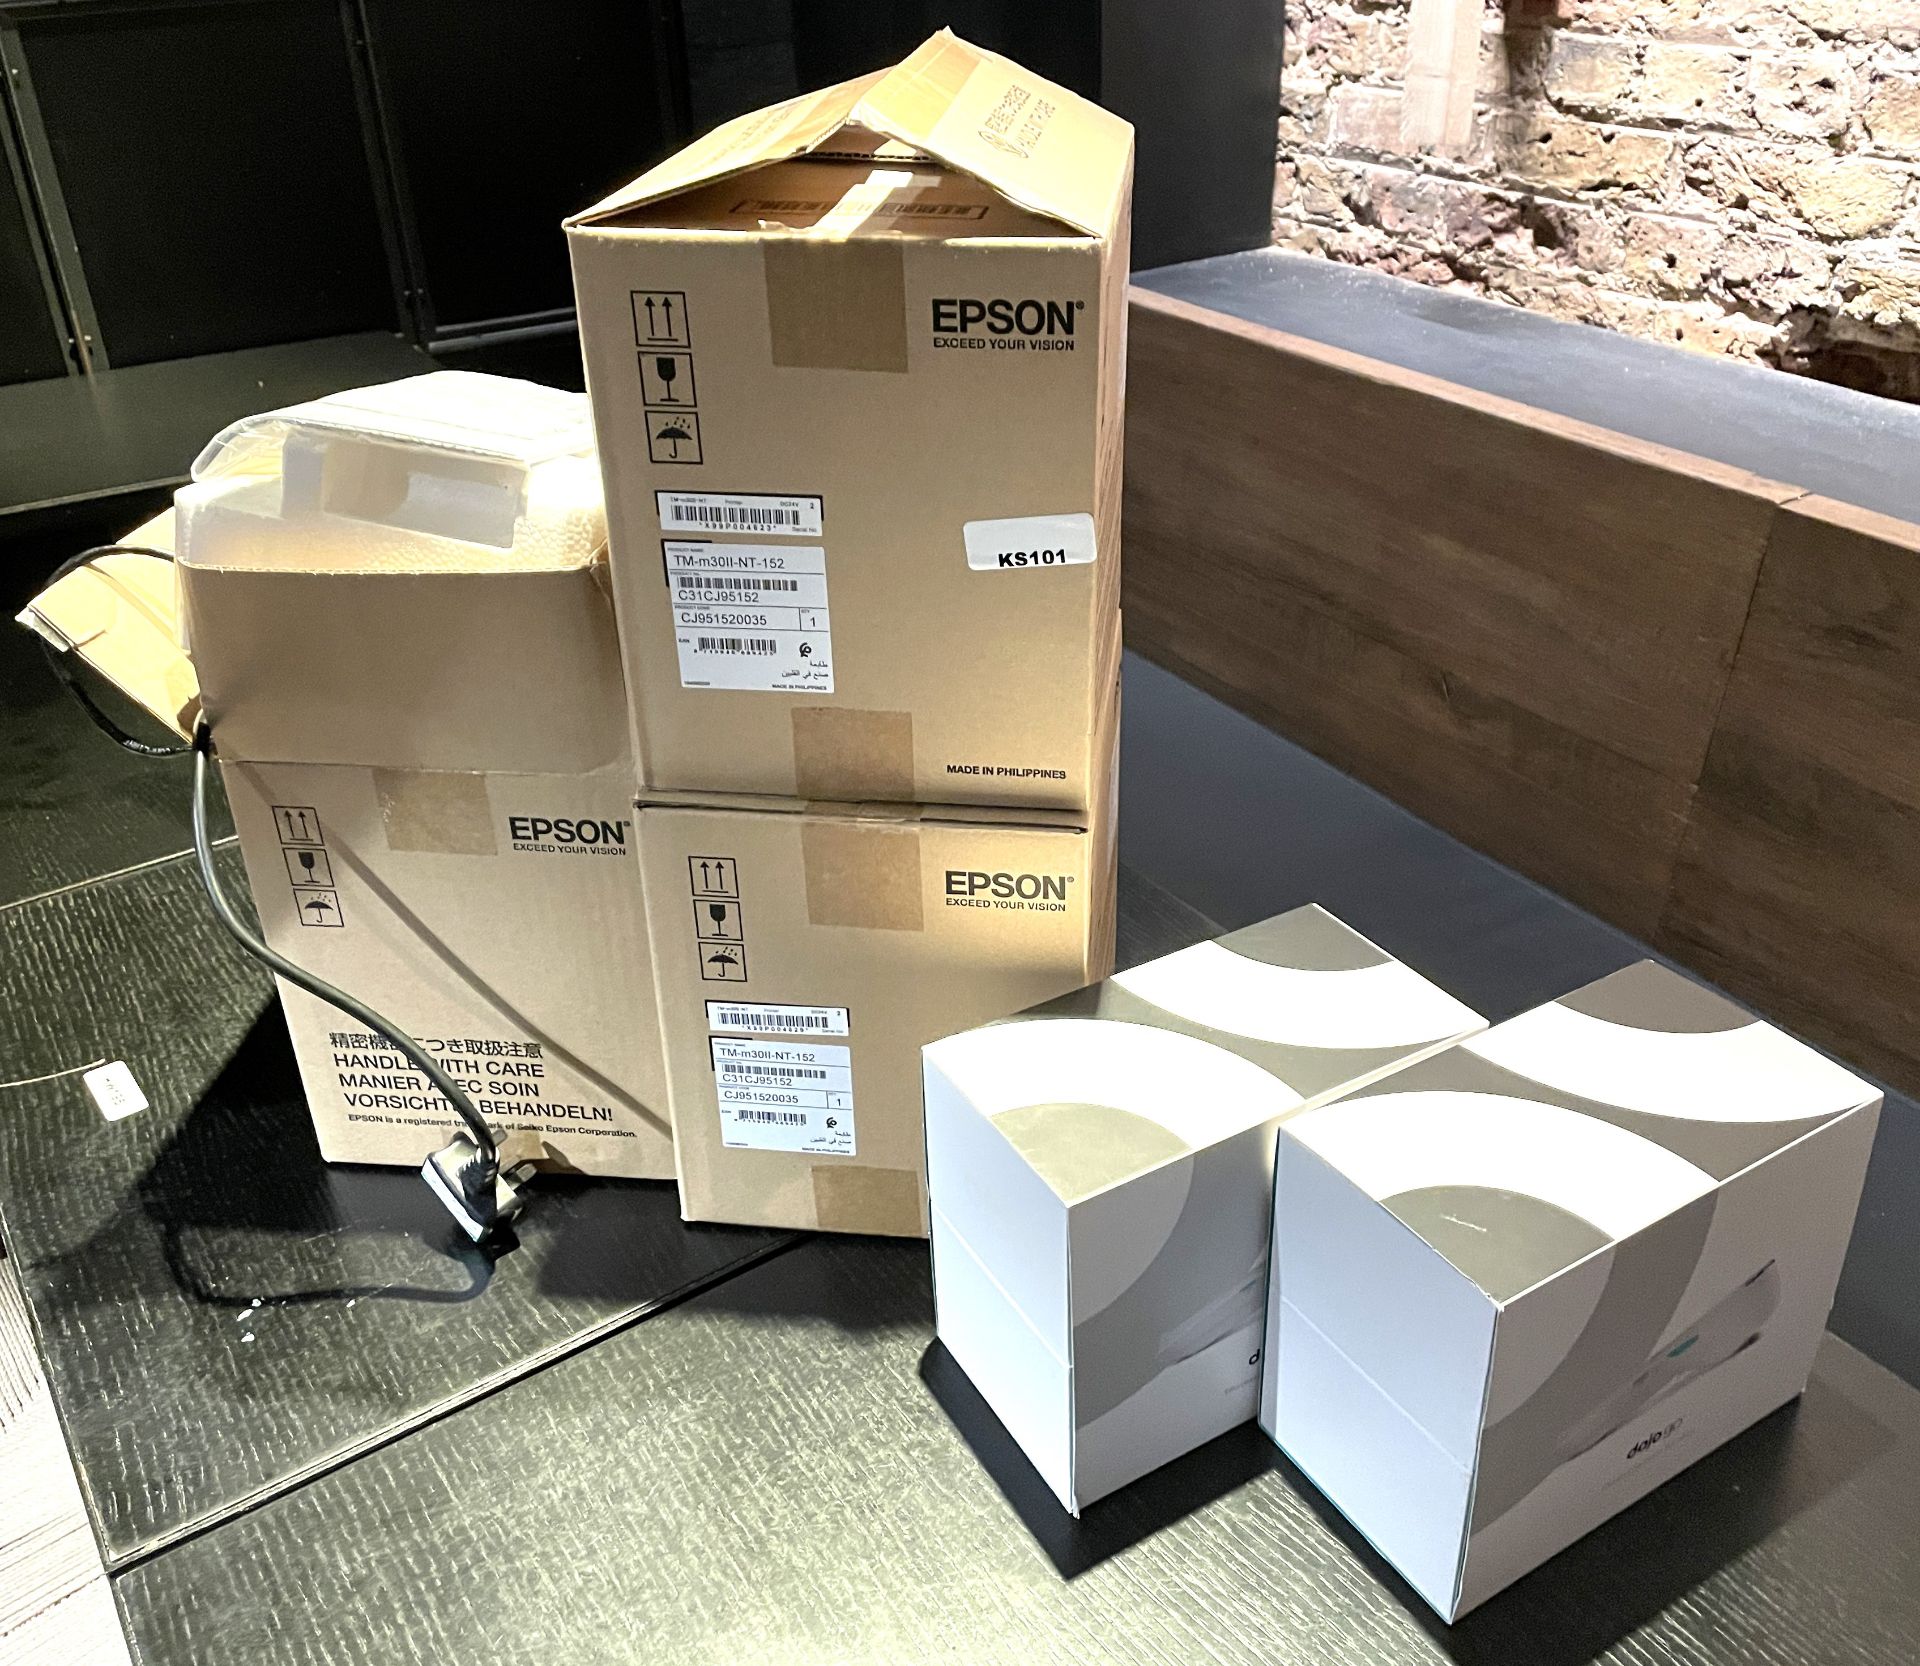 3 x Epson TM-M30II Thermal POS Printers For Apple Devices and 2 x DoJo Go A920 Payment Terminals